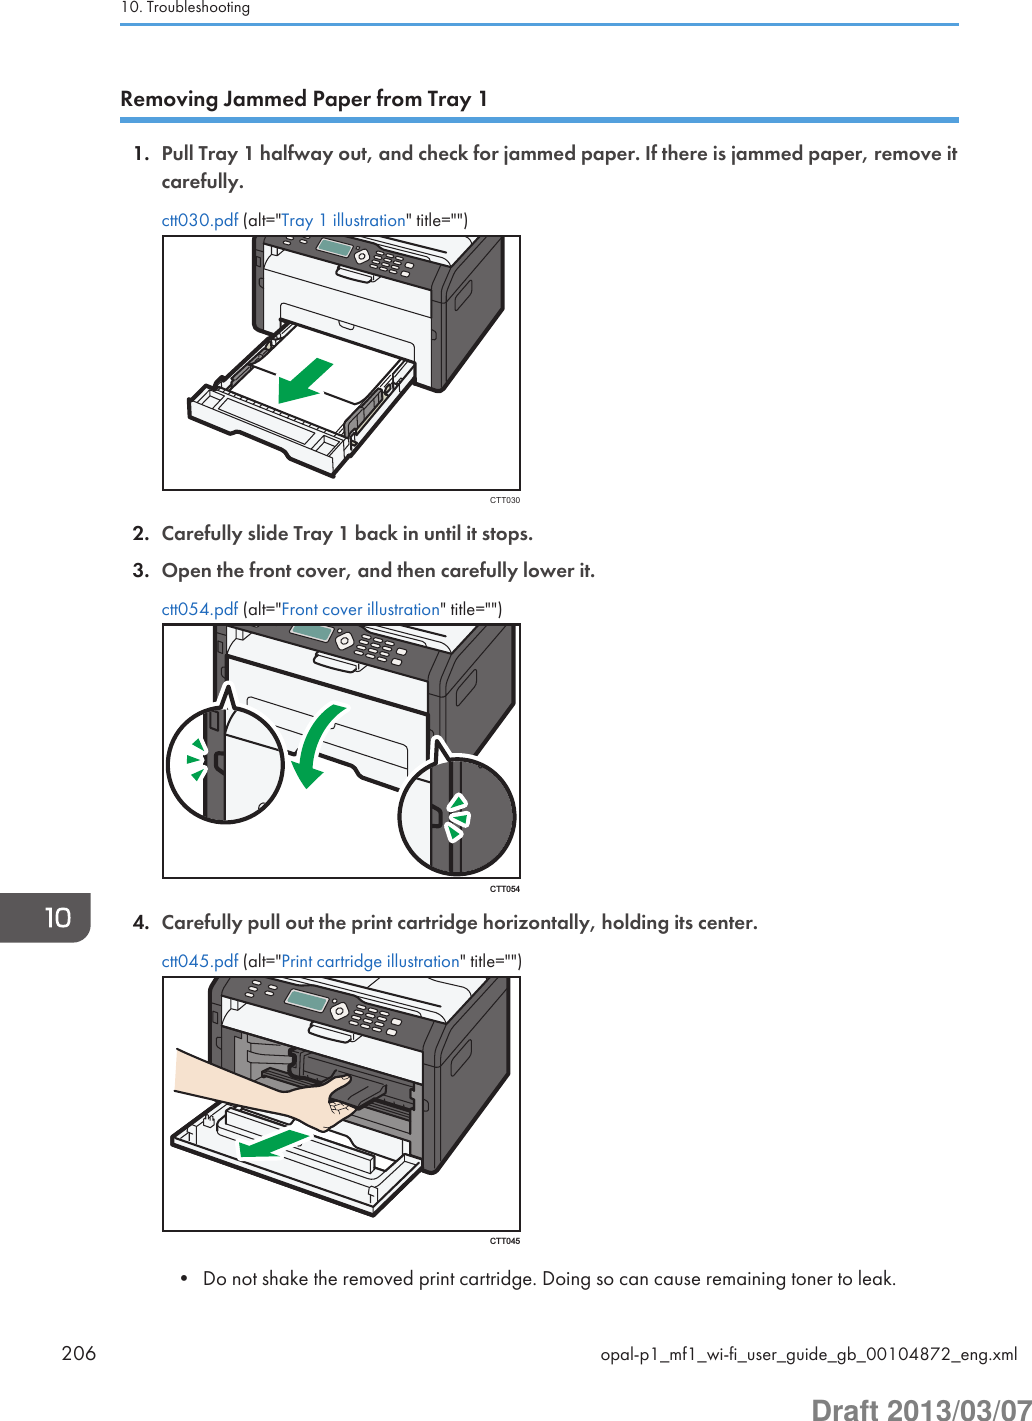 Removing Jammed Paper from Tray 11. Pull Tray 1 halfway out, and check for jammed paper. If there is jammed paper, remove itcarefully.ctt030.pdf (alt=&quot;Tray 1 illustration&quot; title=&quot;&quot;)CTT0302. Carefully slide Tray 1 back in until it stops.3. Open the front cover, and then carefully lower it.ctt054.pdf (alt=&quot;Front cover illustration&quot; title=&quot;&quot;)CTT0544. Carefully pull out the print cartridge horizontally, holding its center.ctt045.pdf (alt=&quot;Print cartridge illustration&quot; title=&quot;&quot;)CTT045• Do not shake the removed print cartridge. Doing so can cause remaining toner to leak.10. Troubleshooting206 opal-p1_mf1_wi-fi_user_guide_gb_00104872_eng.xmlDraft 2013/03/07